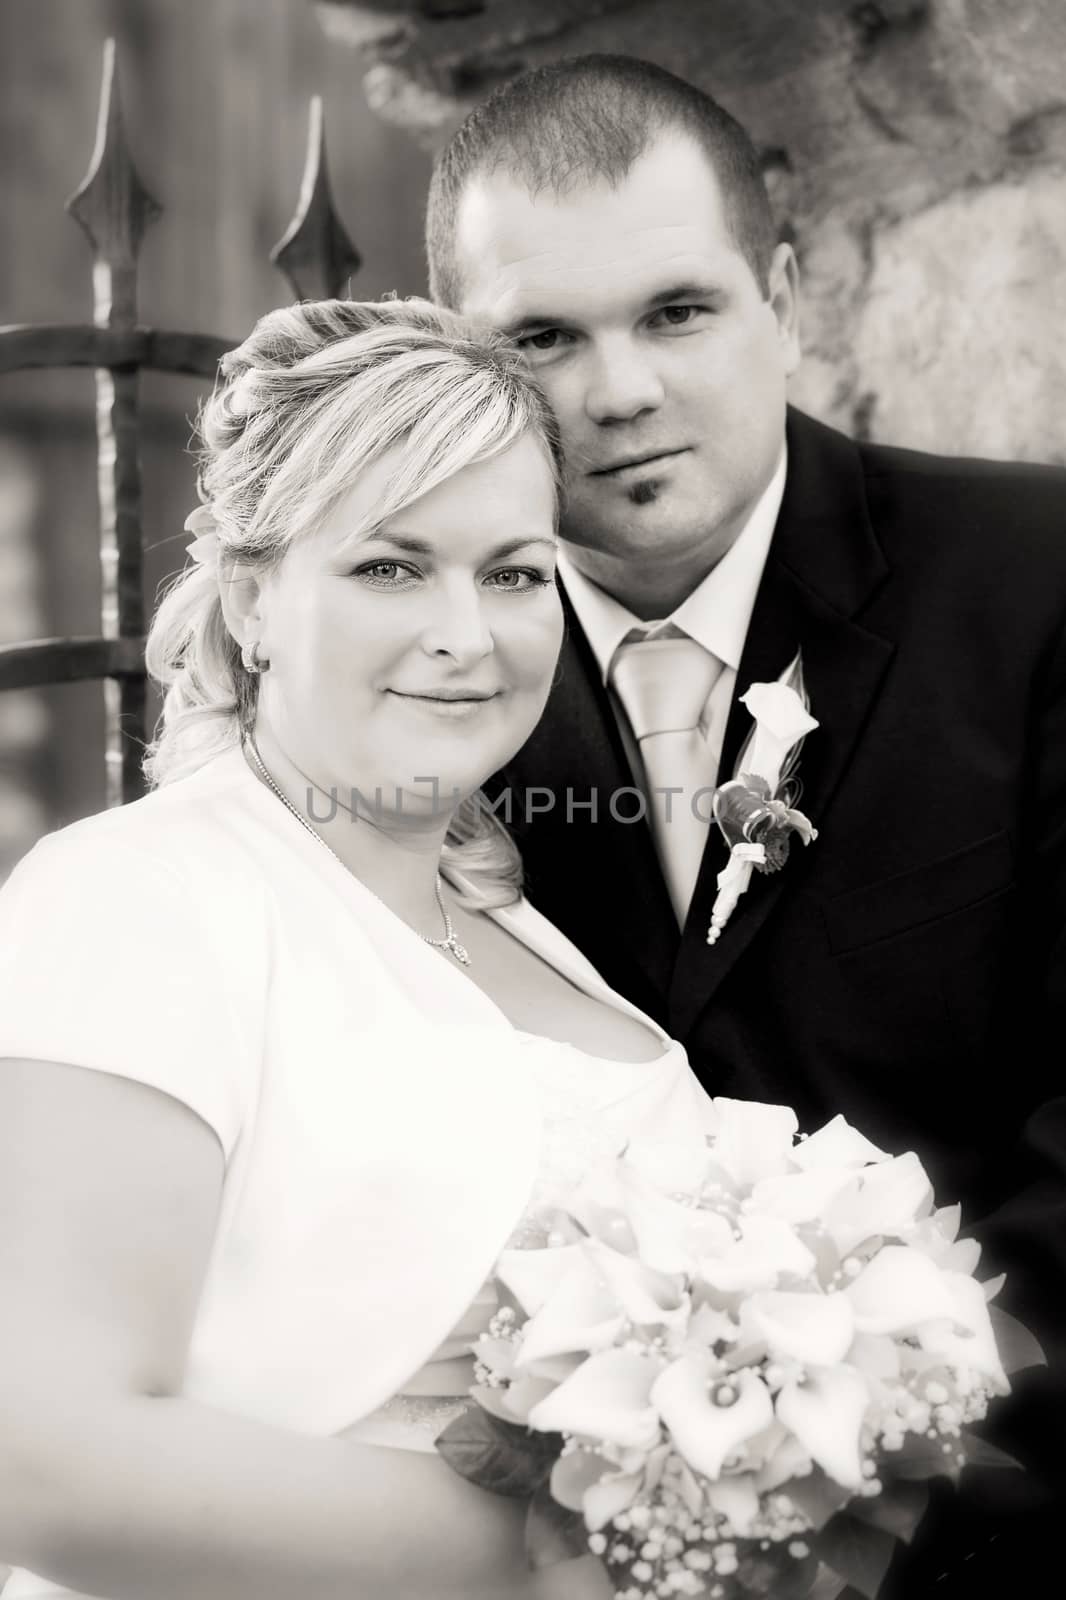 beautiful young wedding couple, bride and her groom, black and white tone